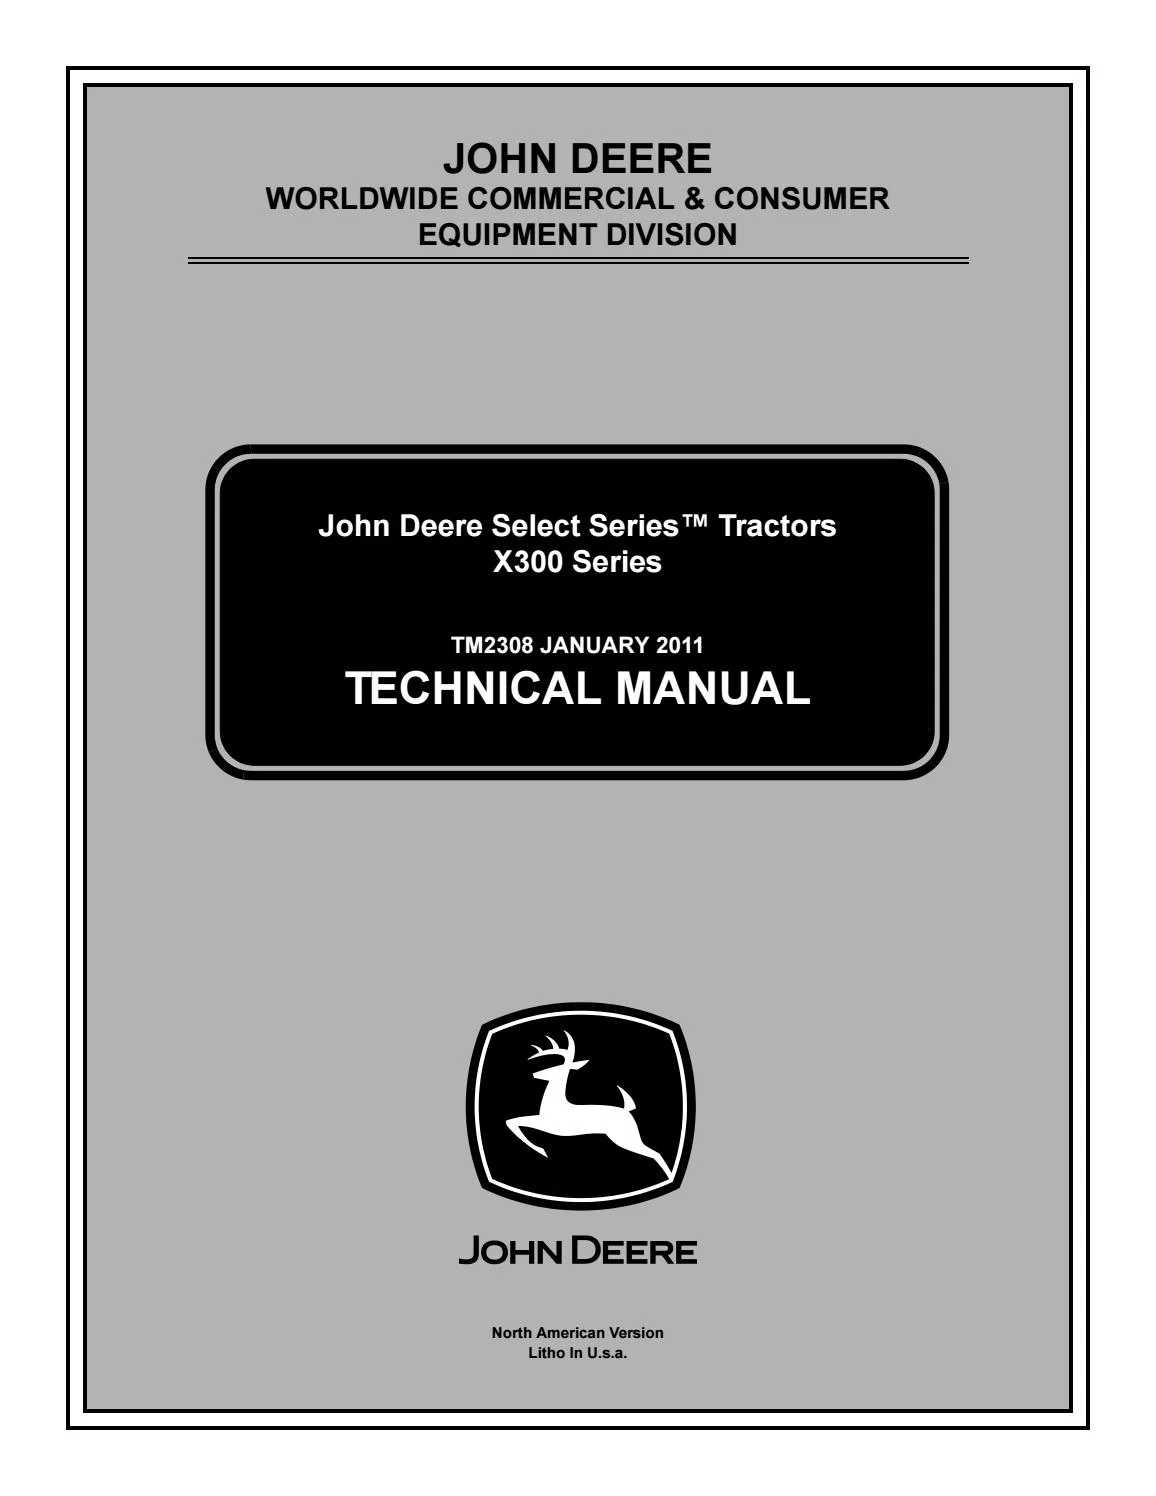 Free PDF Service Manual: John Deere X300 - Your Complete Guide